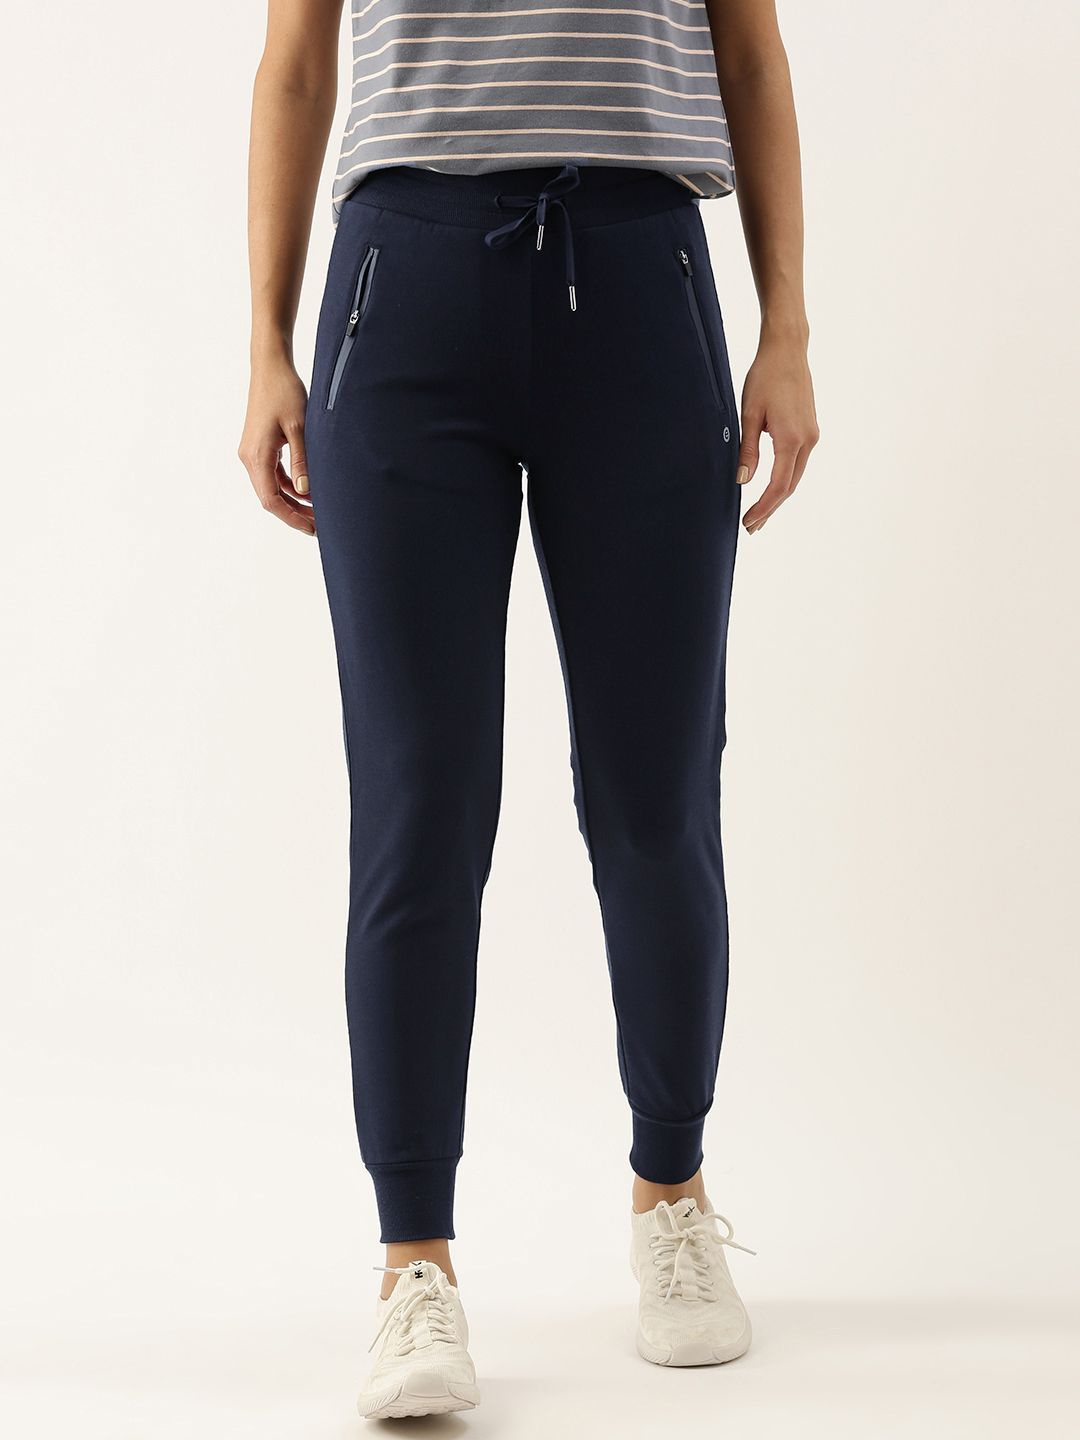 Enamor Womens Navy Blue Athleisure Cotton Spandex Terry Joggers Price in India